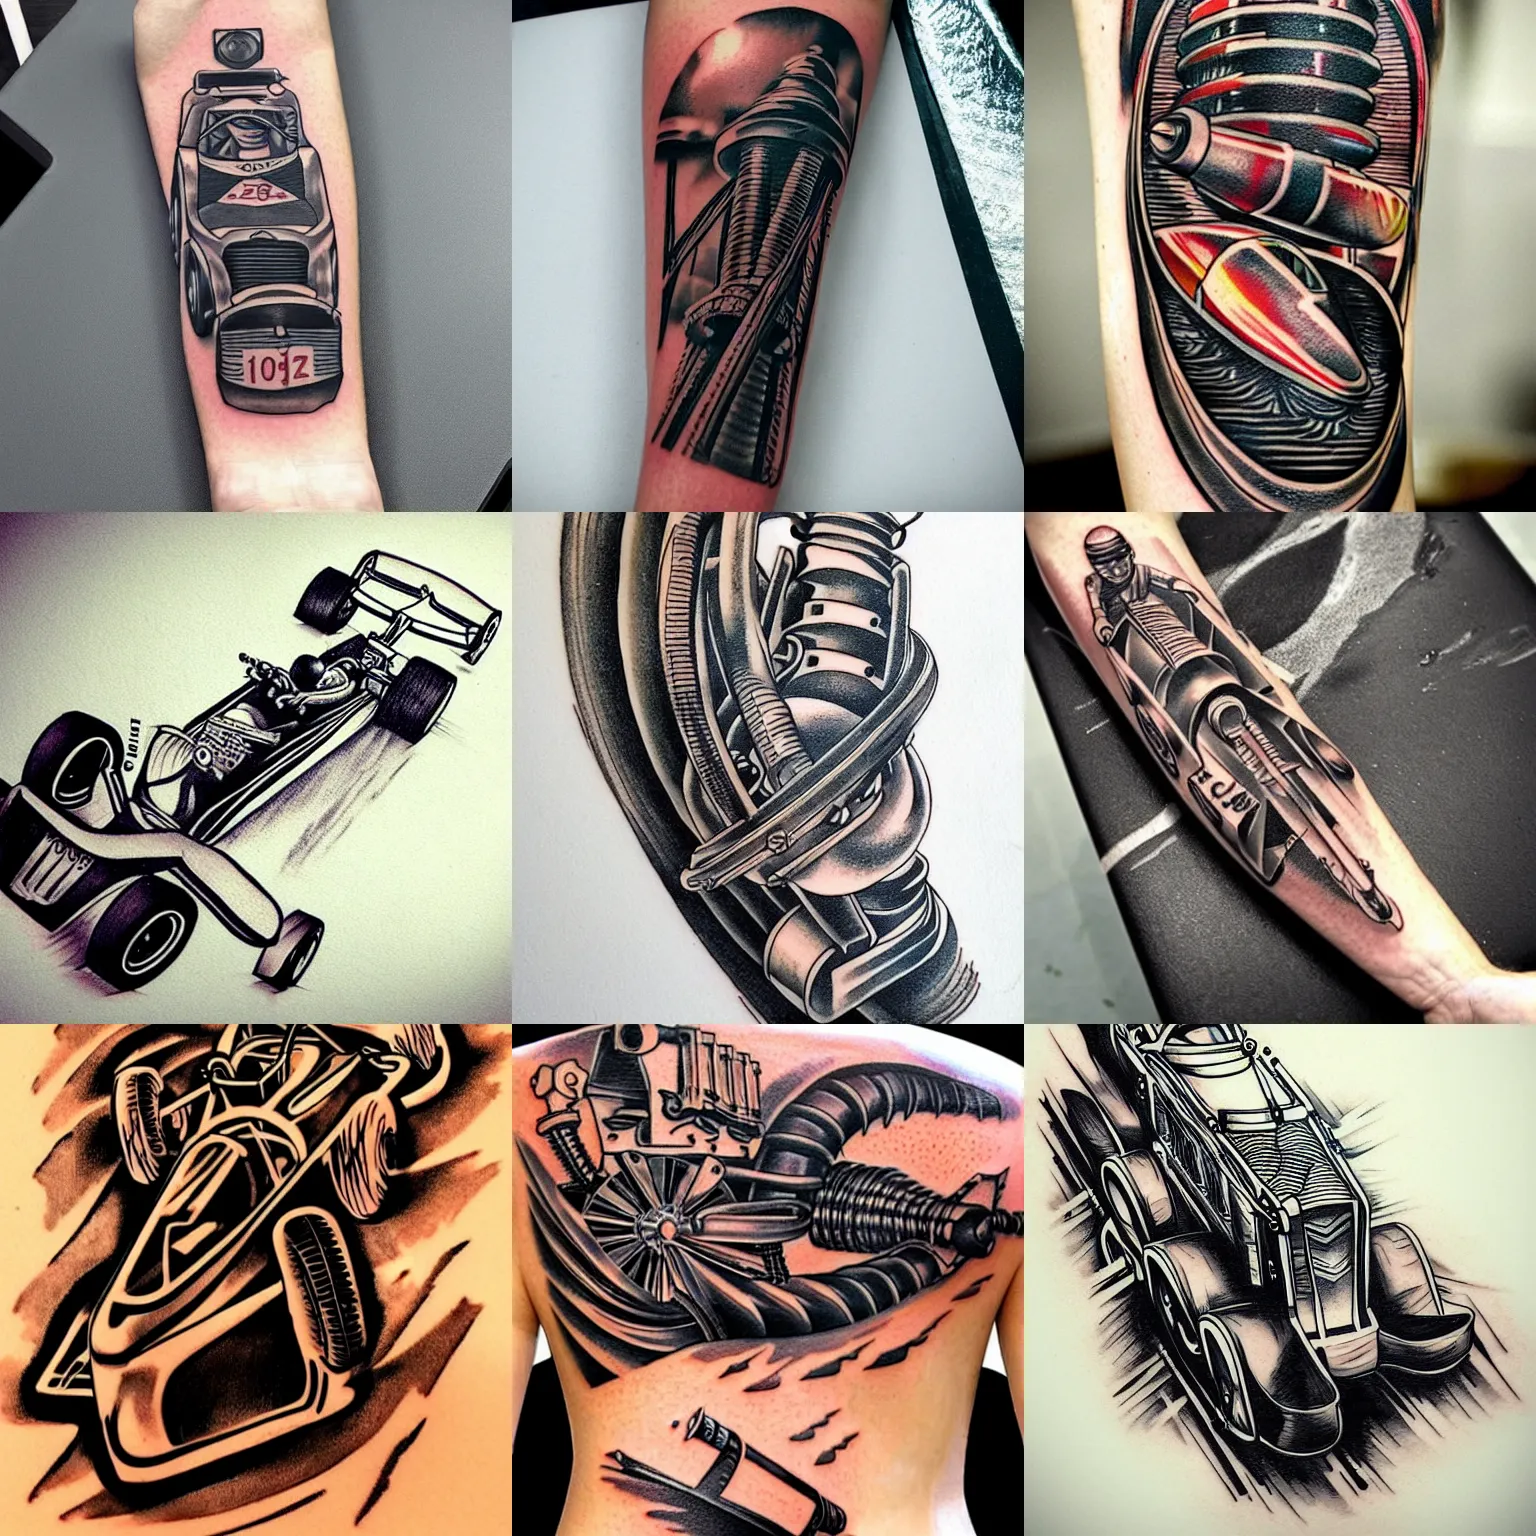 a tattoo artwork of a dragster with a v 8 engine | Stable Diffusion